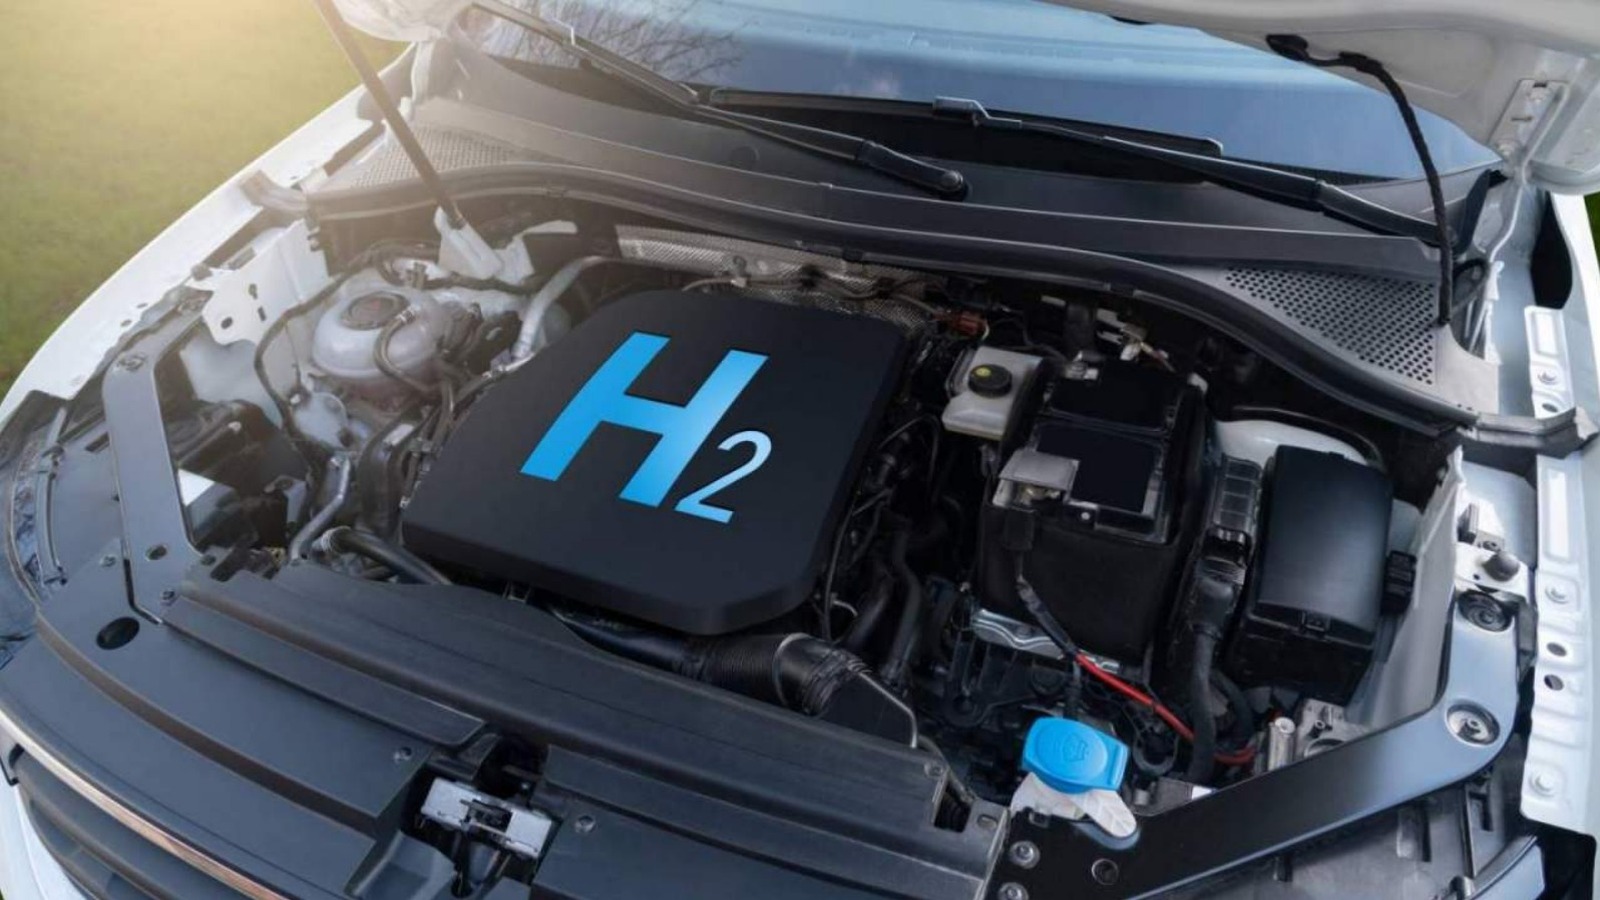 This Hydrogen Breakthrough Could DISRUPT The Whole Energy Industry